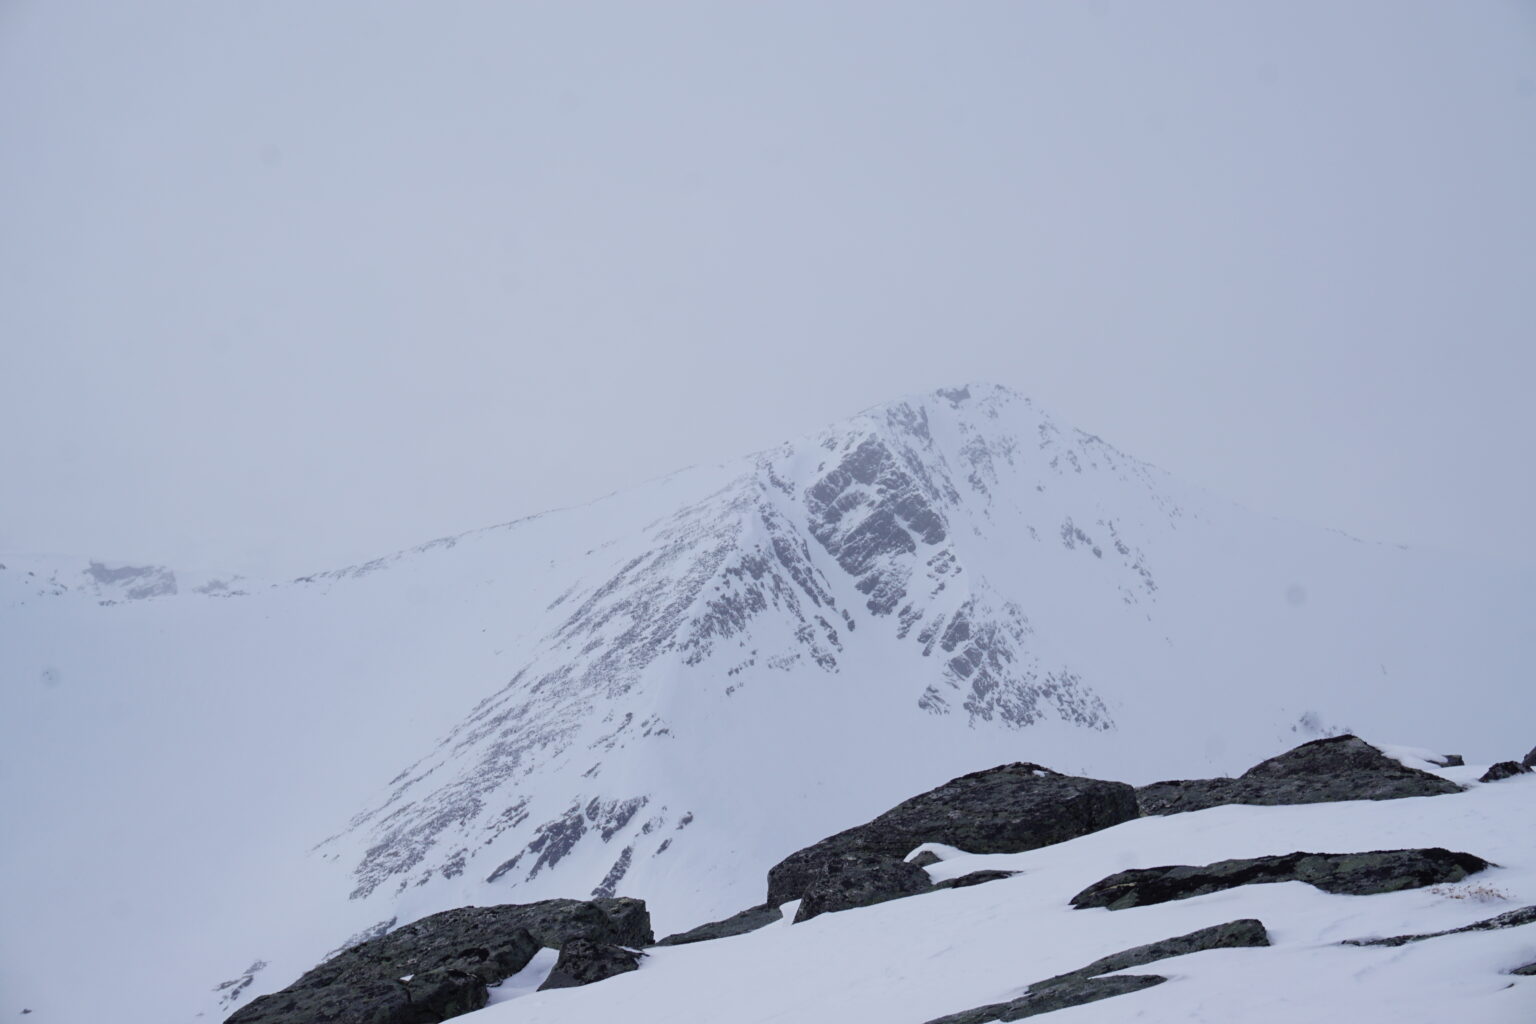 A stormy day in the Tamokdalen Backcountry